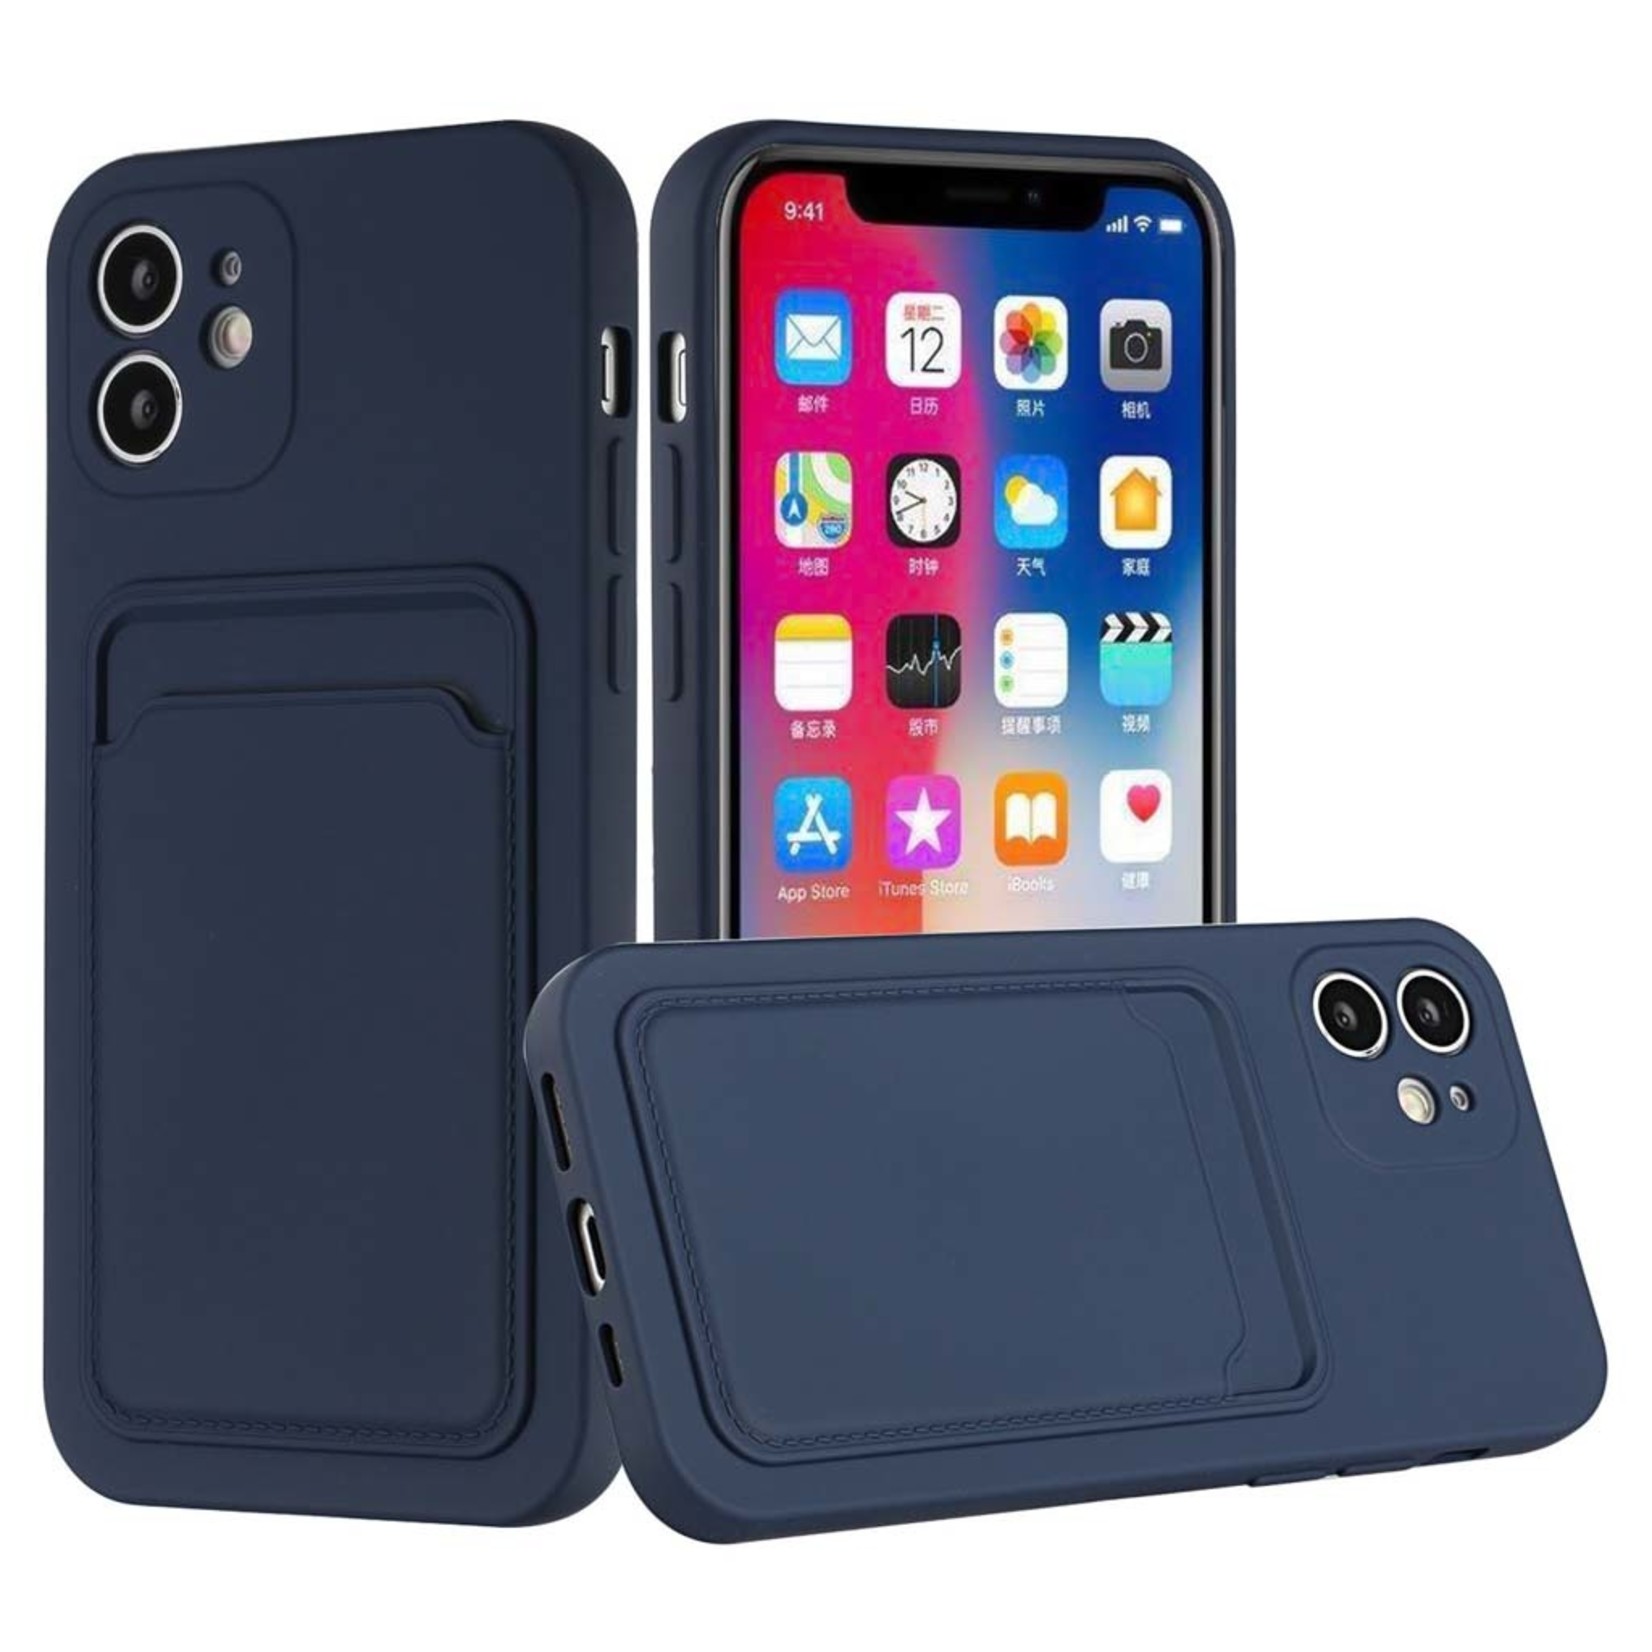 Pro Case with Credit Card Holder for iPhone 12 Pro (ONLY)